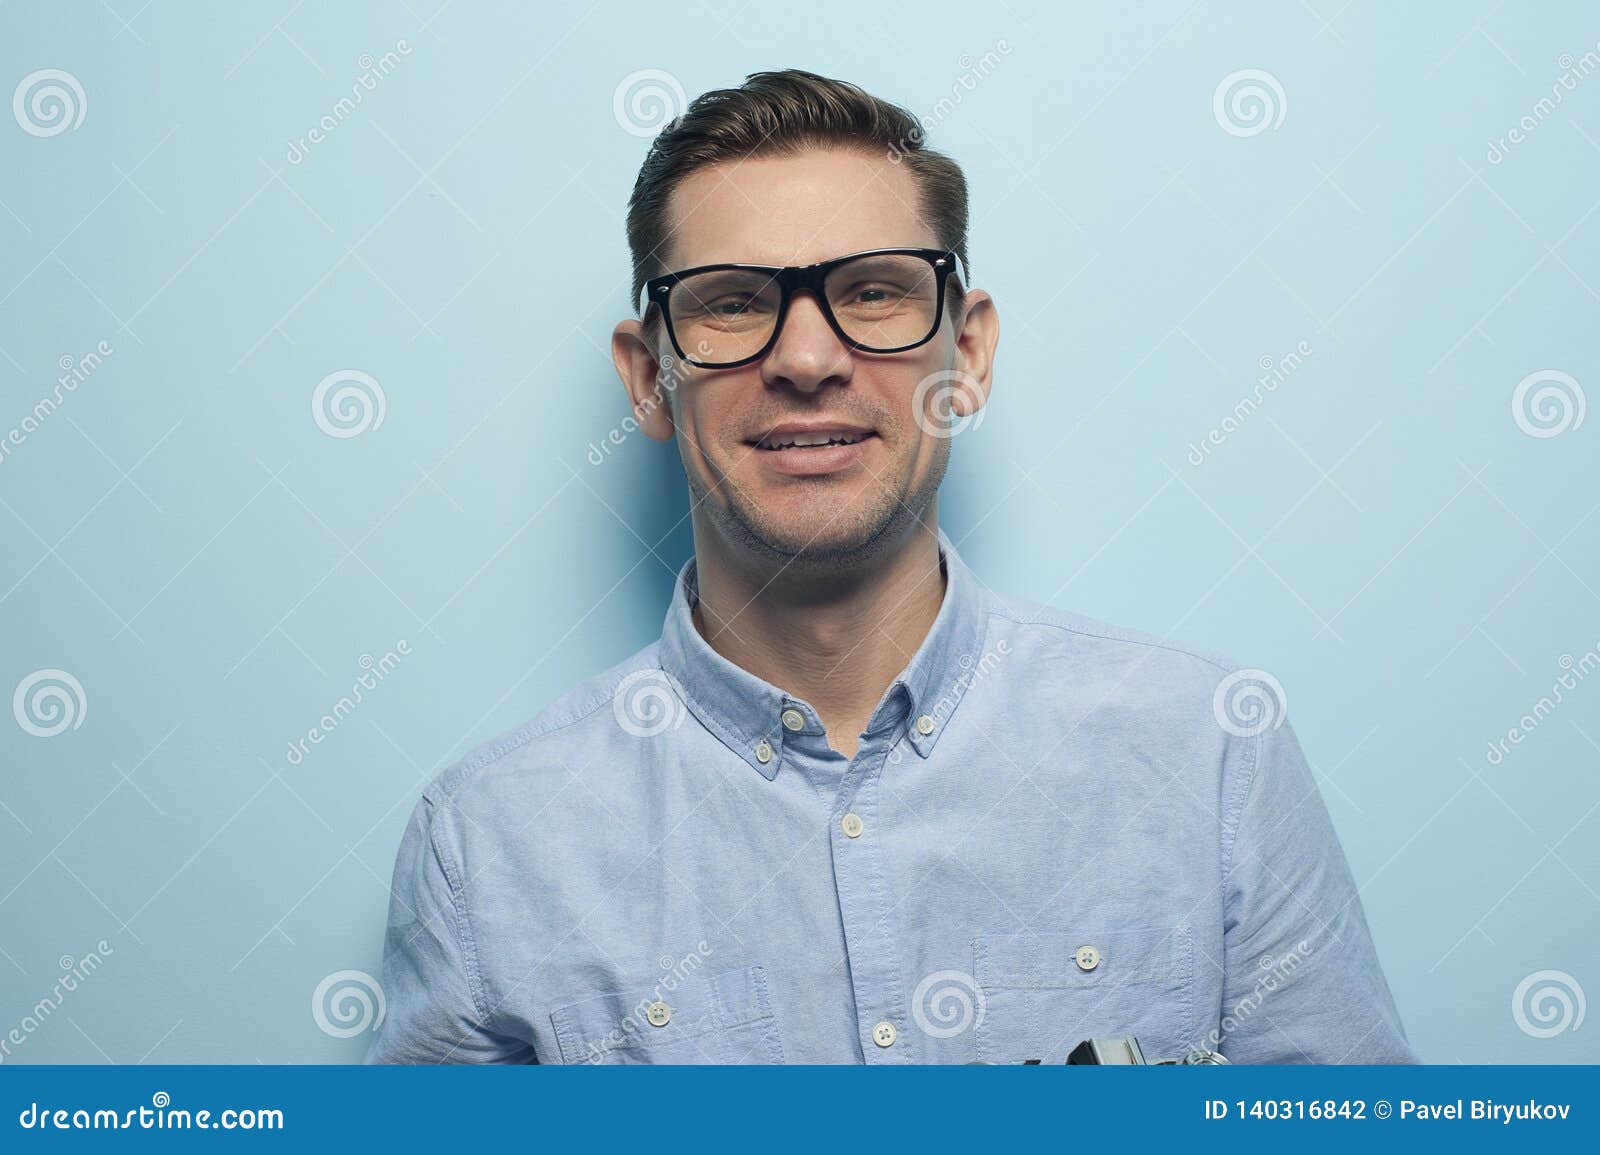 Young Handsome Guy Office Manager Stock Photo - Image of folded, blue ...